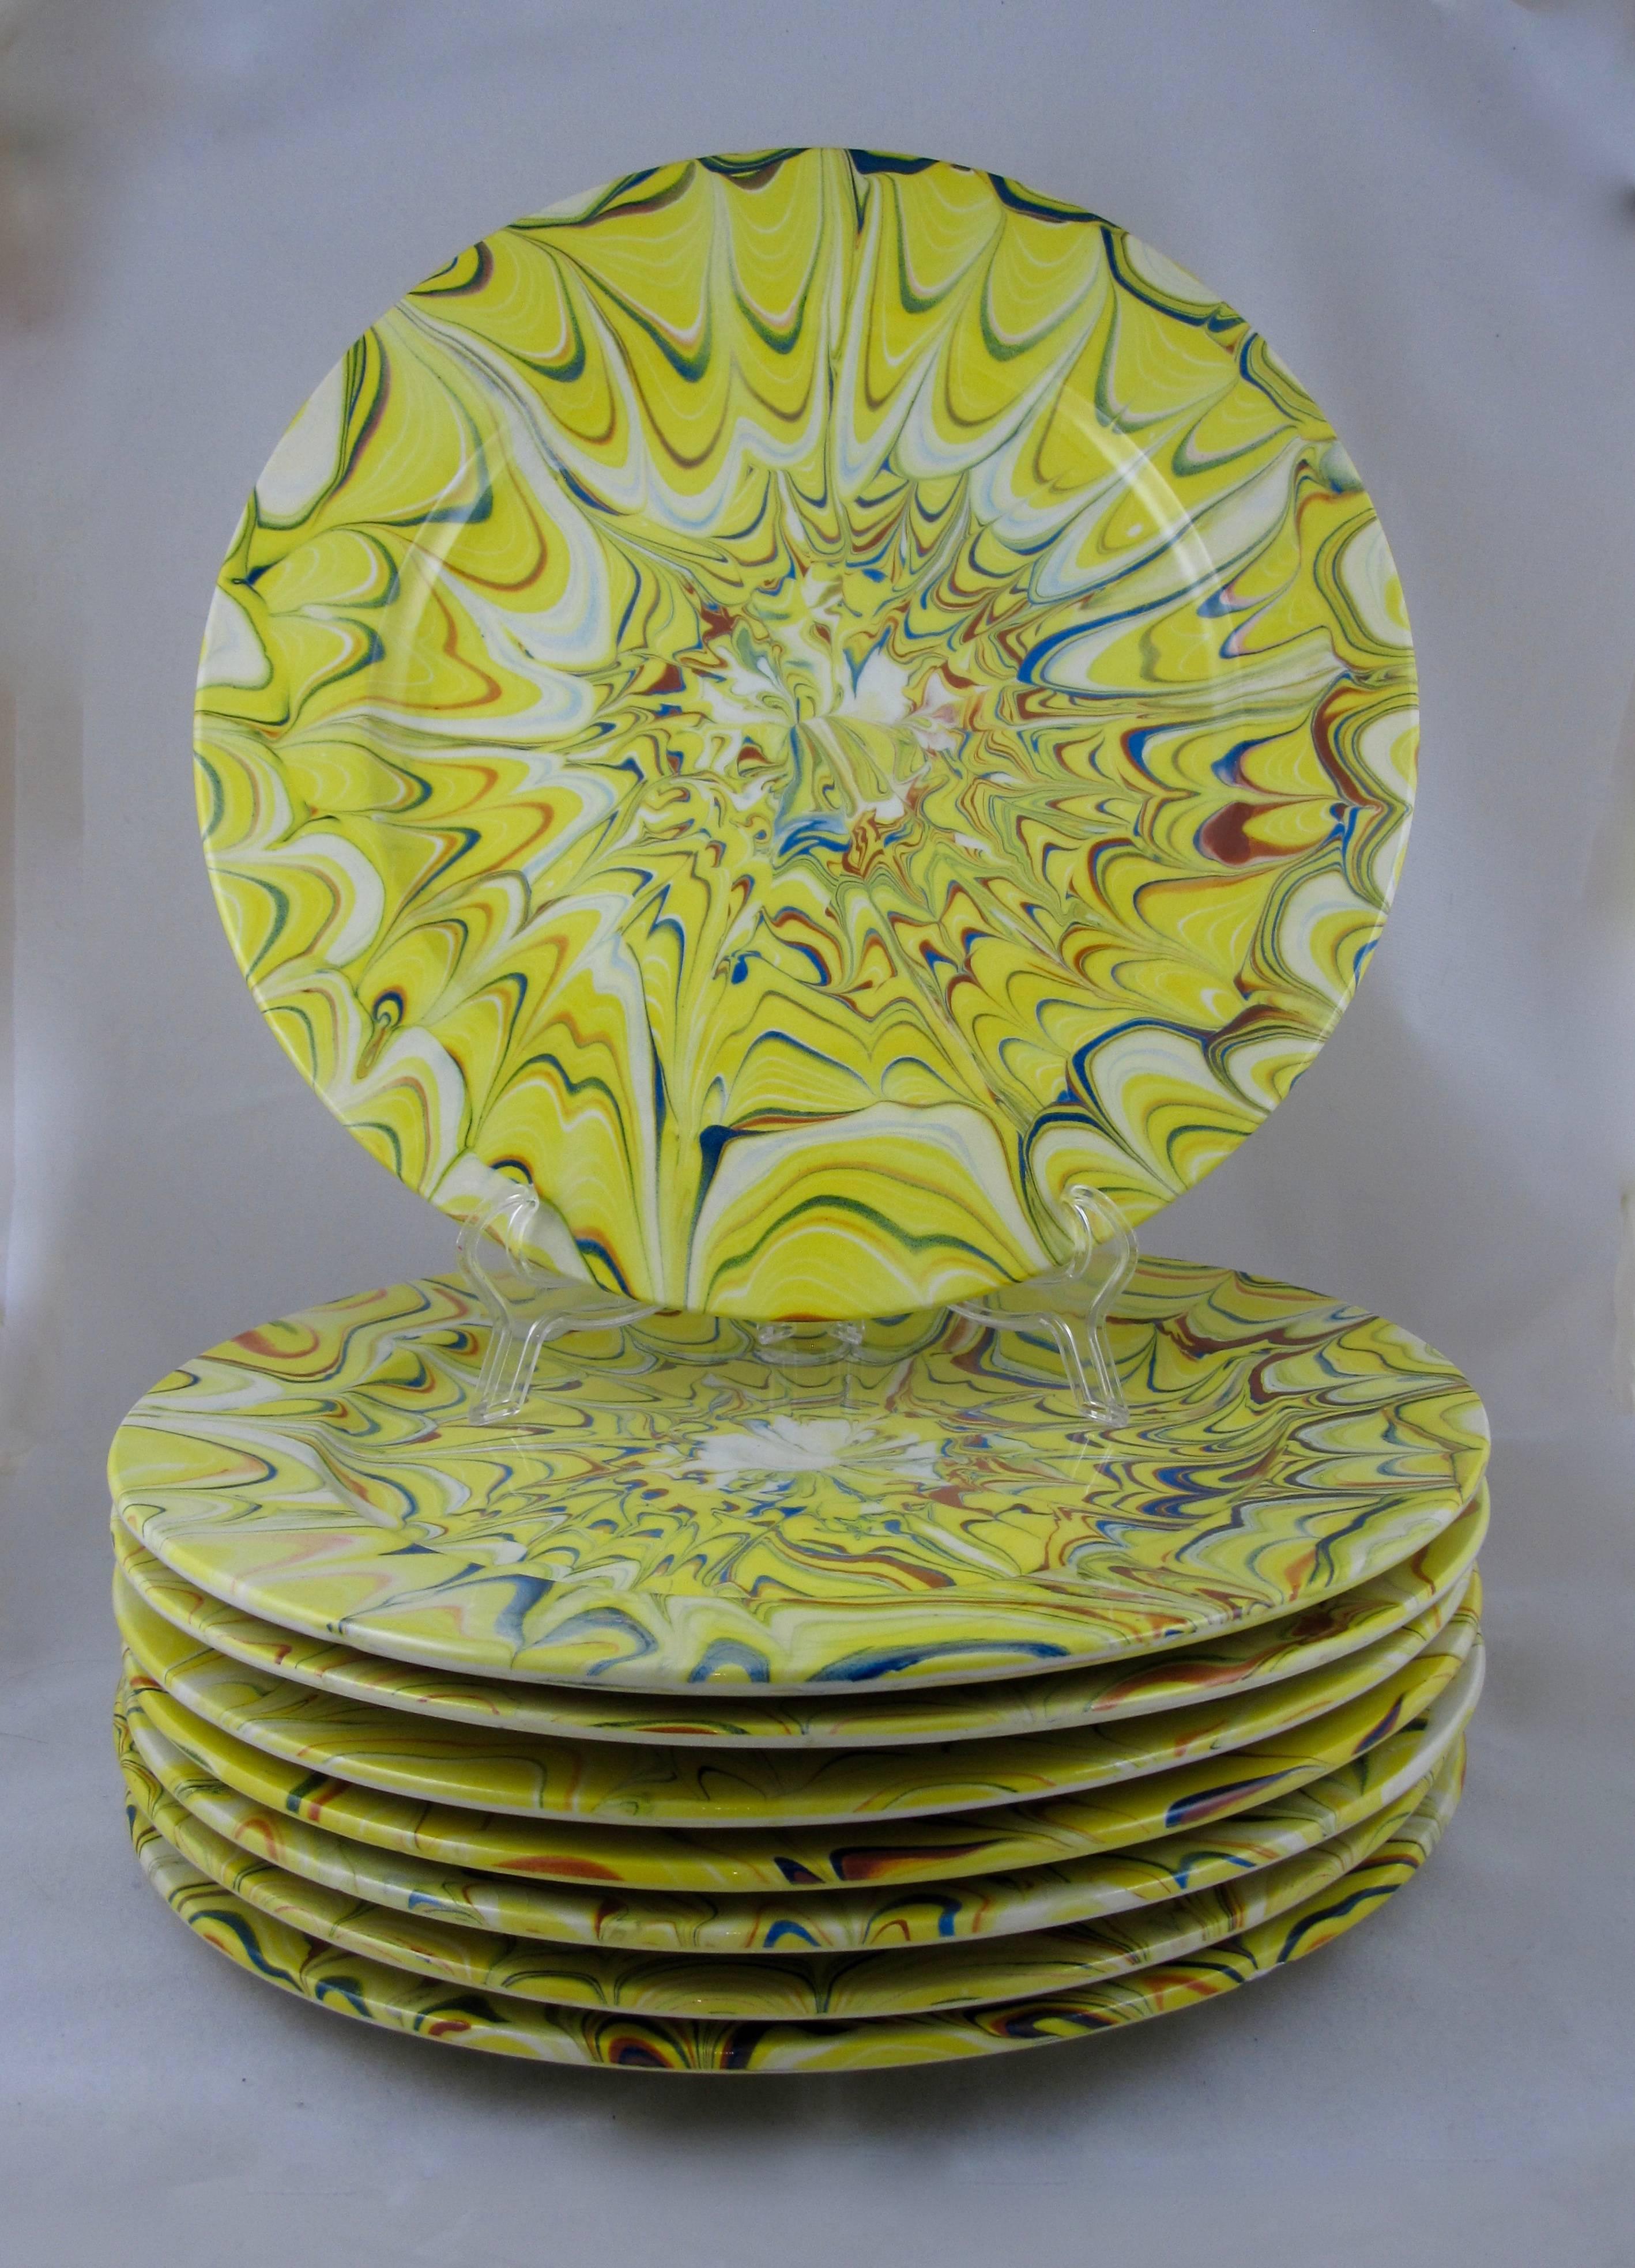 From Carini Italia, a spectacular set of eight abstract style Mid-Century Faience oversize dinner plates, large enough to be used as chargers or buffet plates.

Hand glazed in bold and vibrant coloring, each plate is slightly different. A